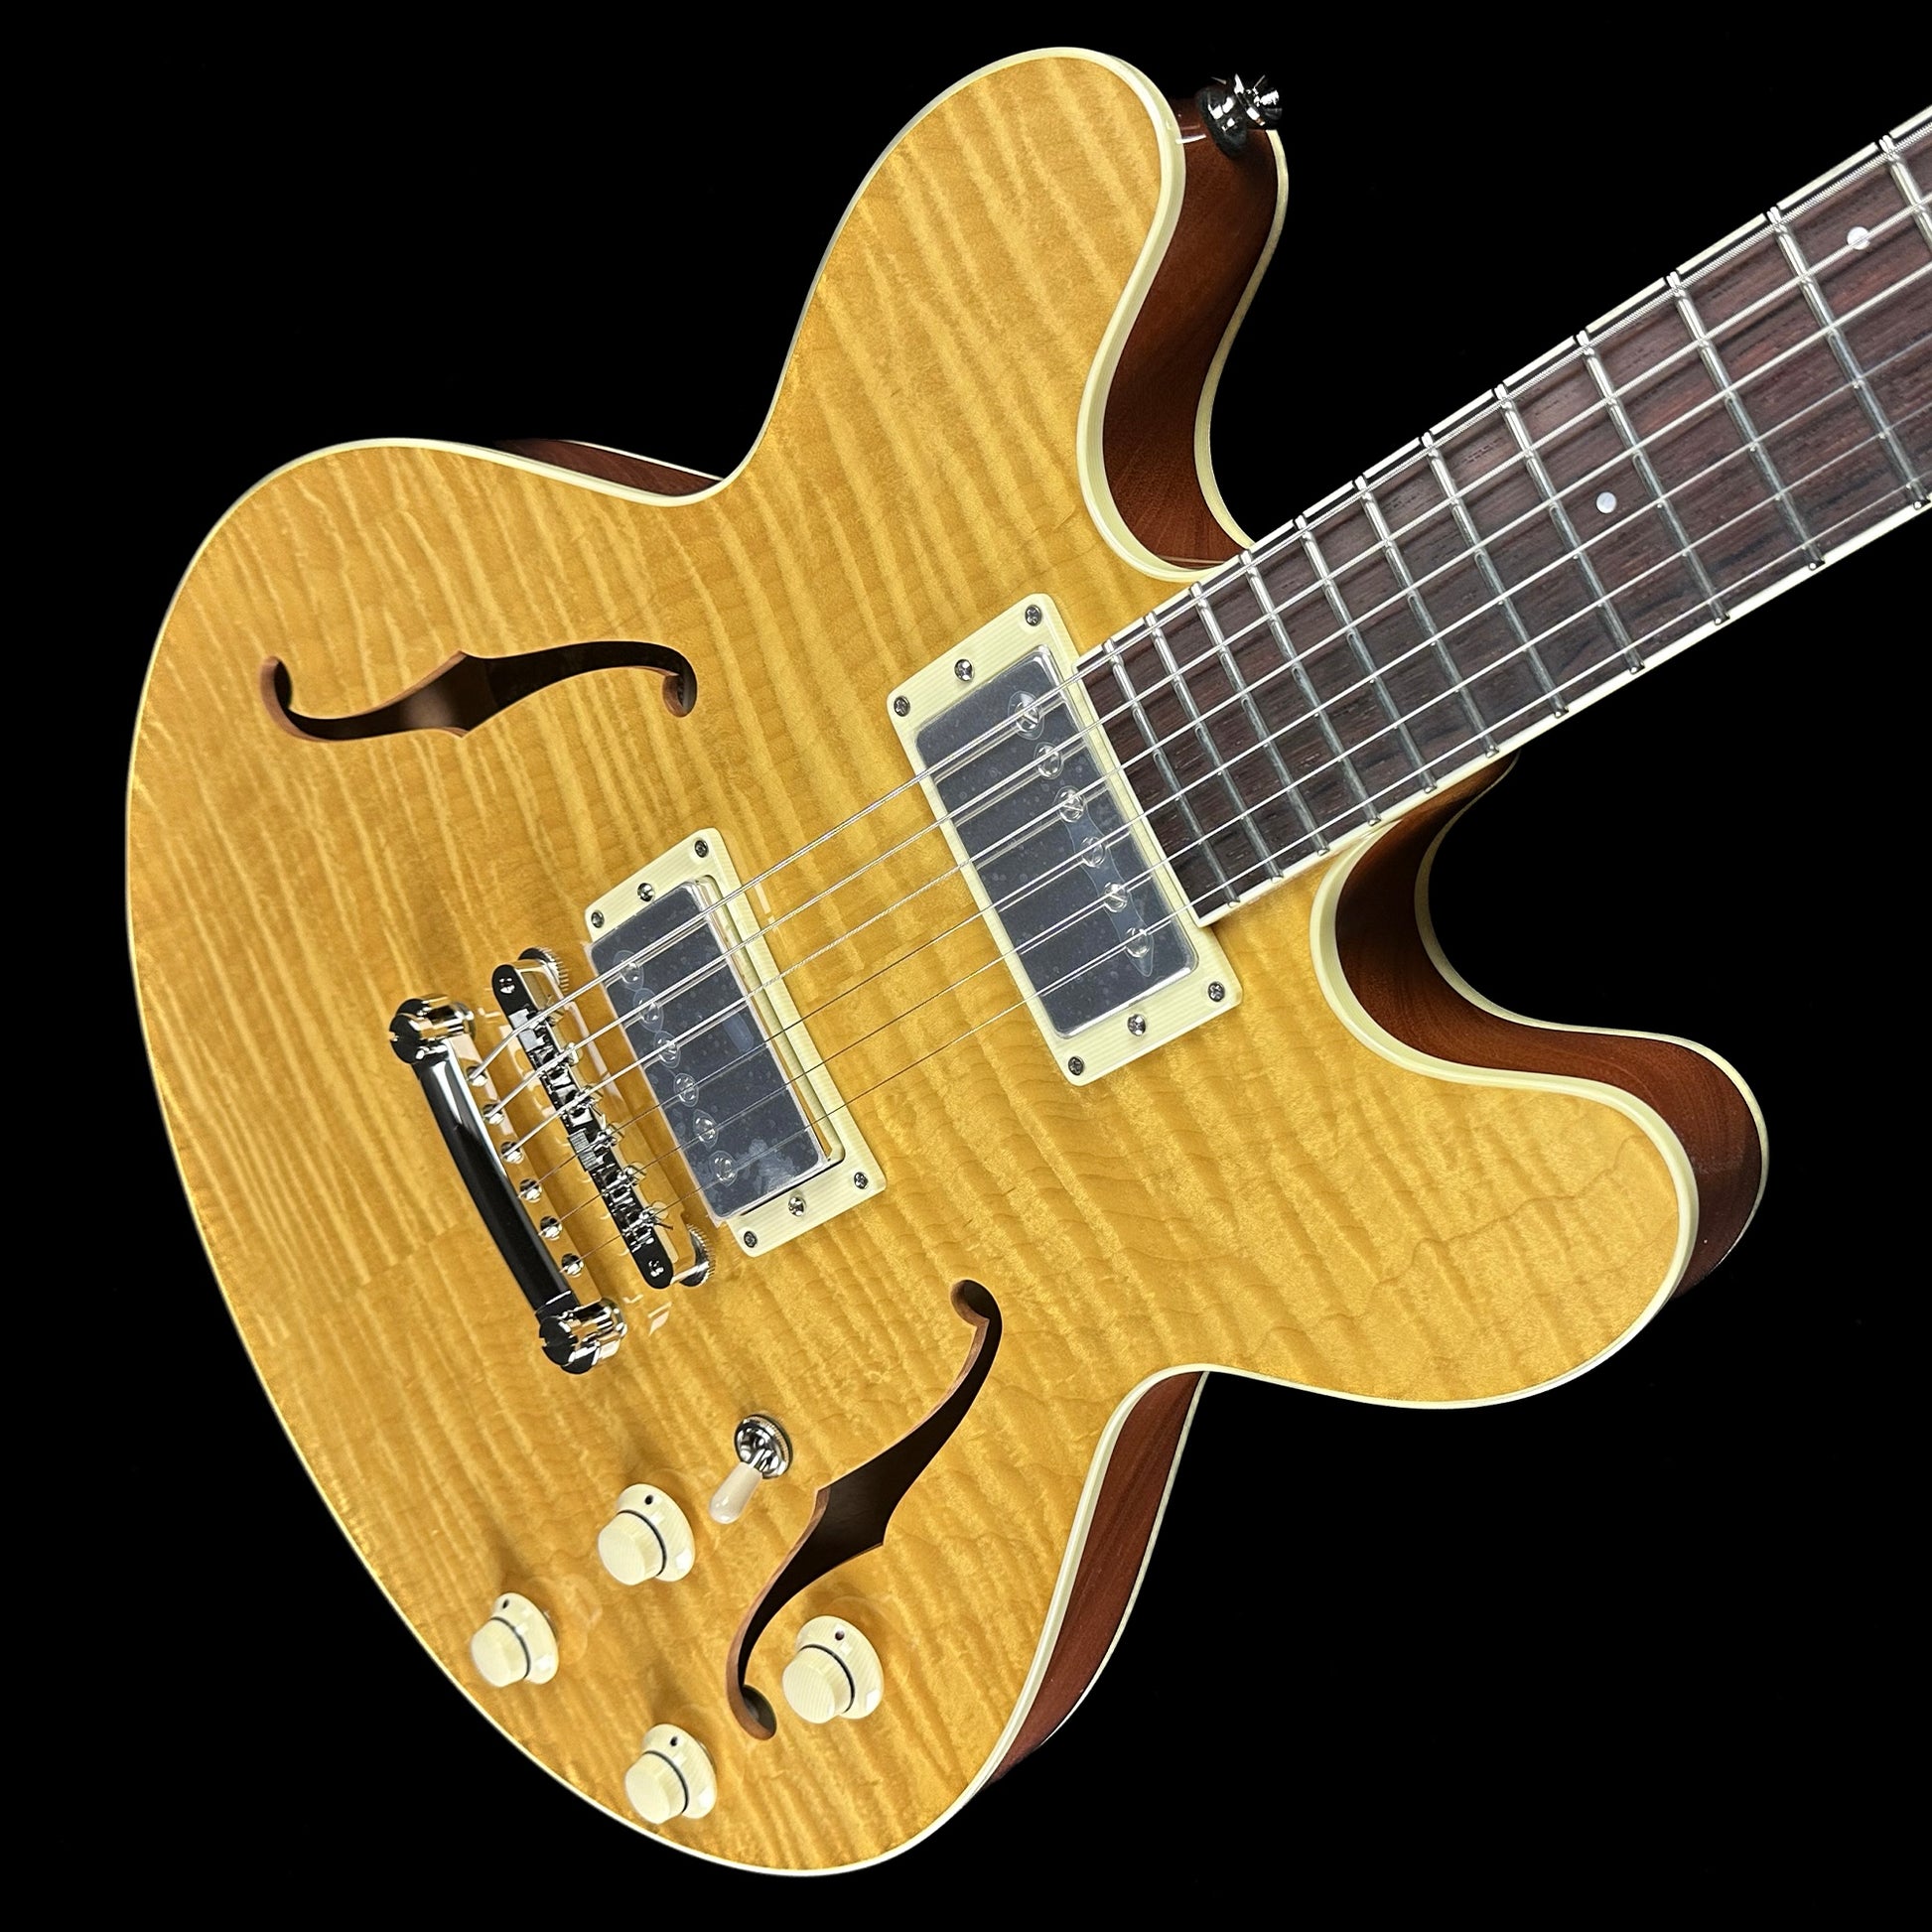 Top down angle of Collings I-35 Deluxe Blonde Flame Top ThroBaks.